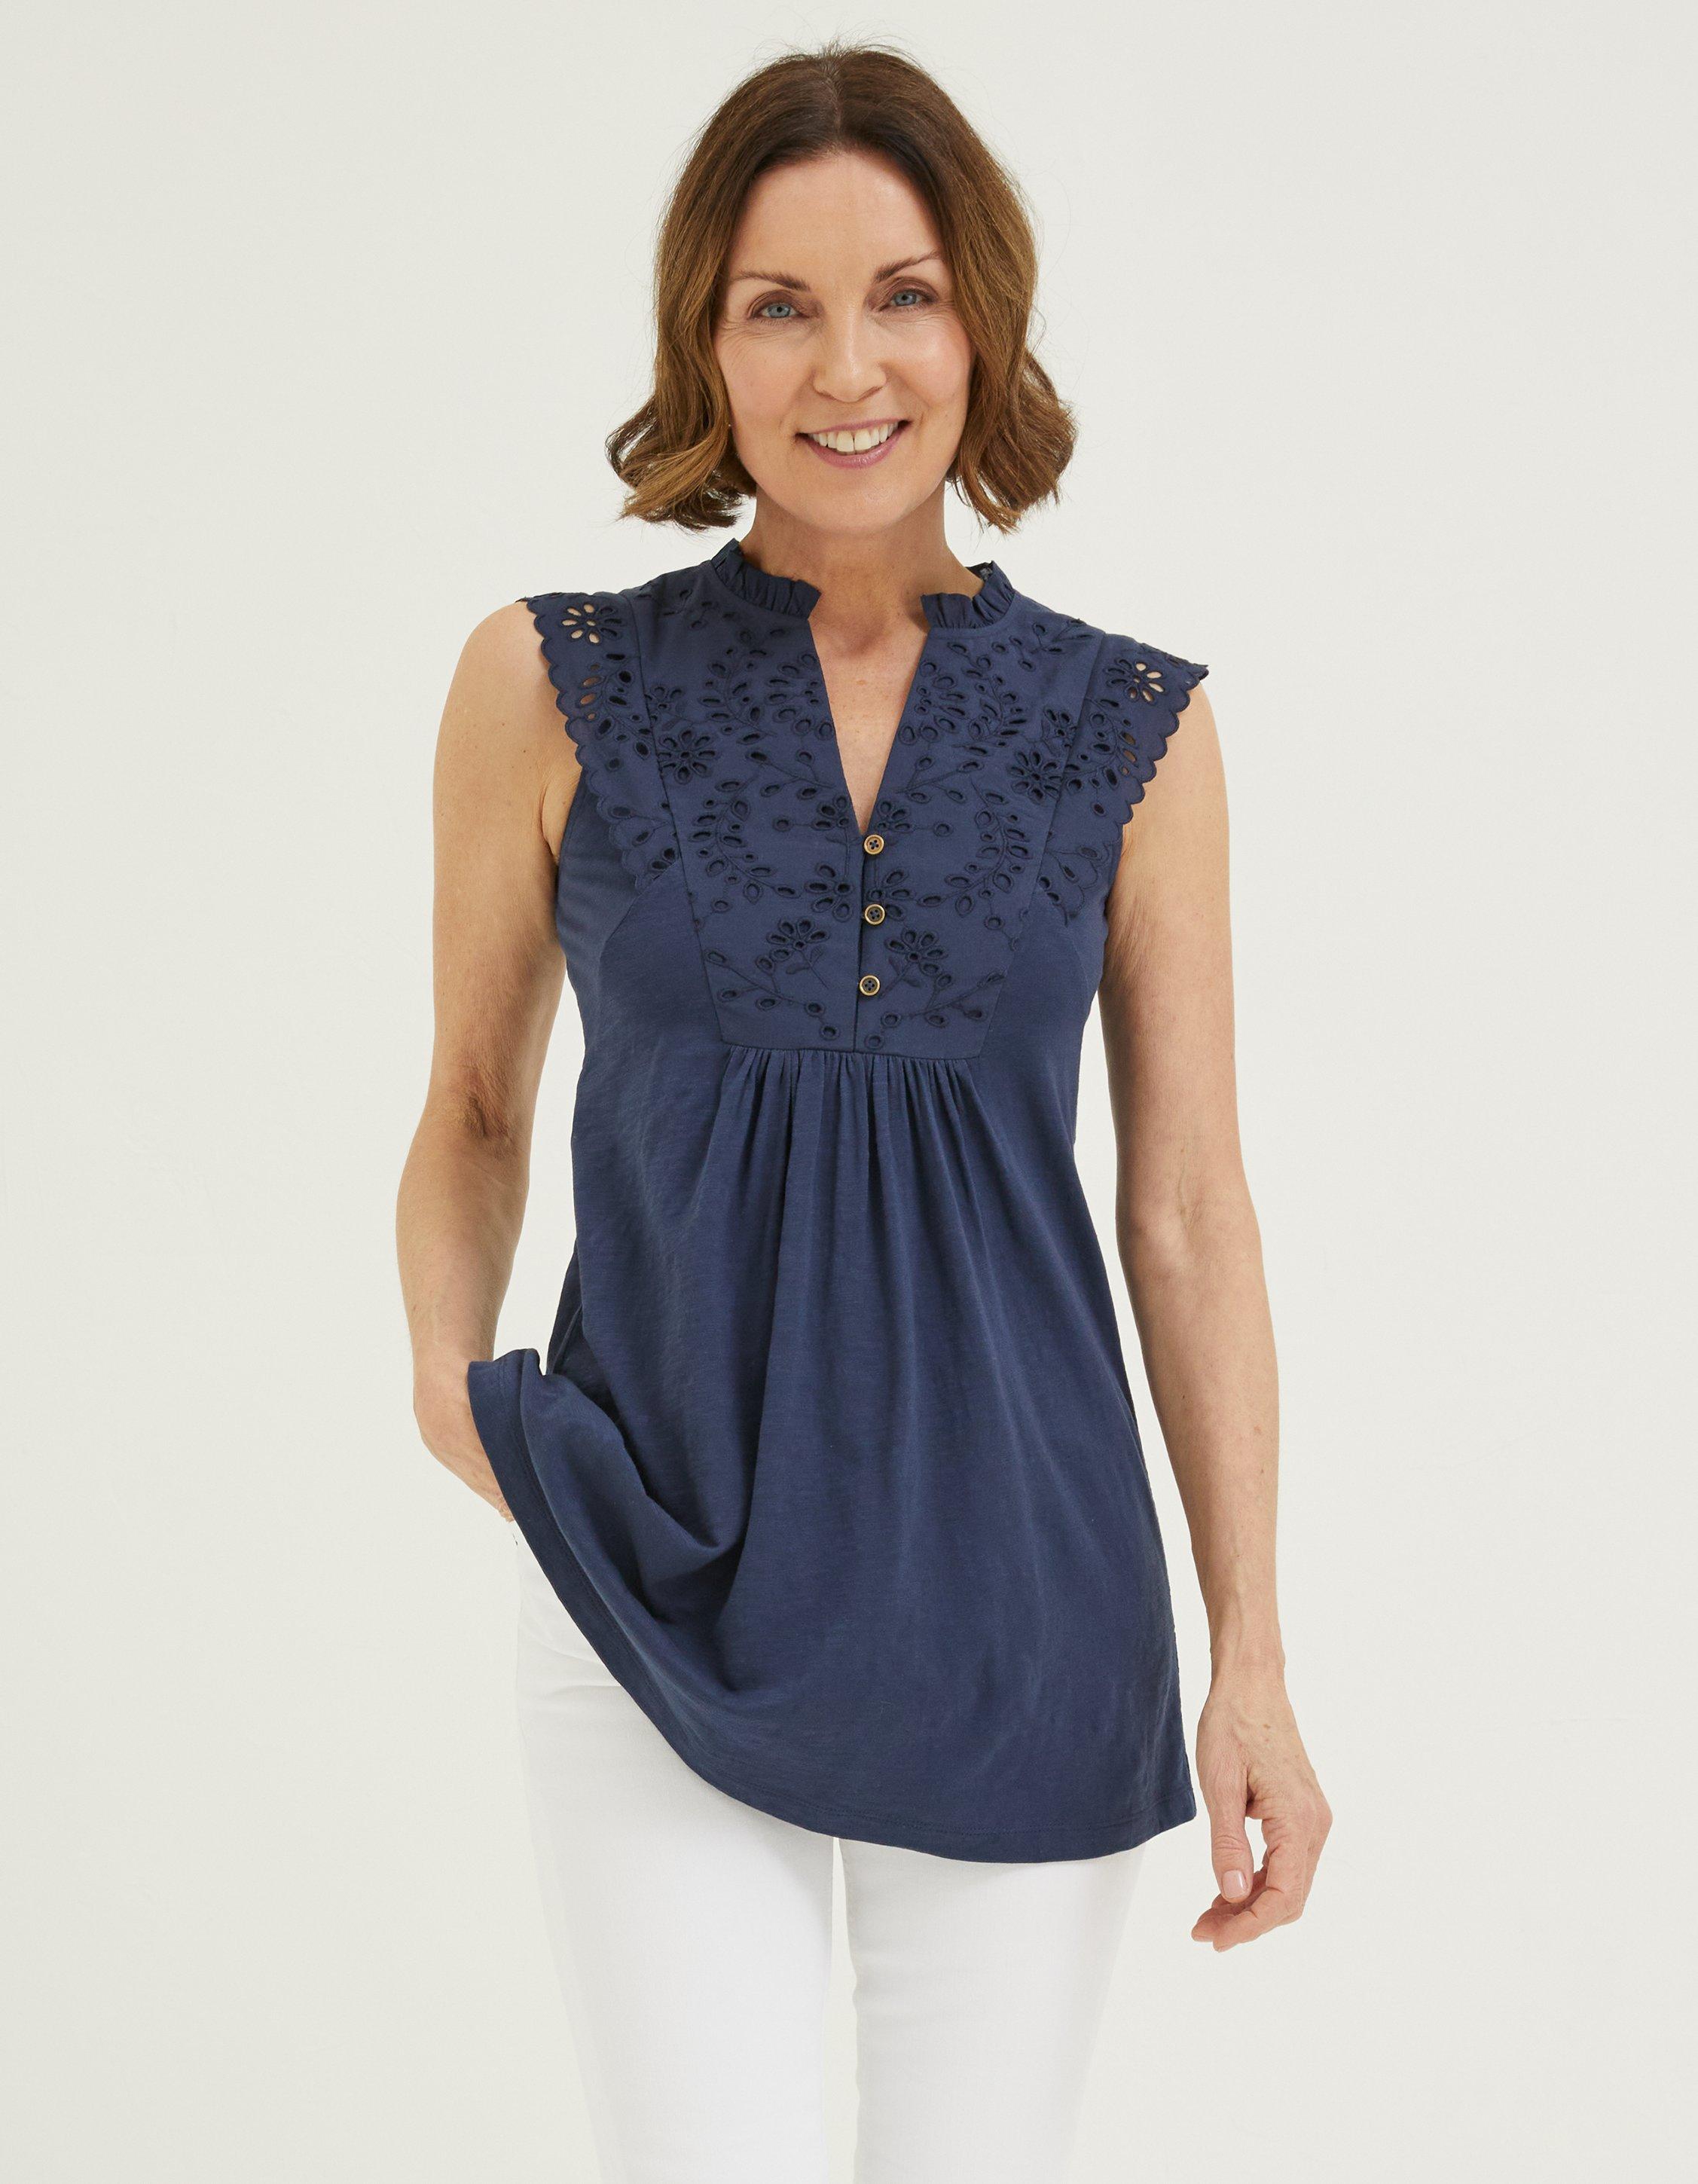 Jessica Embroidered Tunic Top, Tops & T-Shirts | FatFace.com